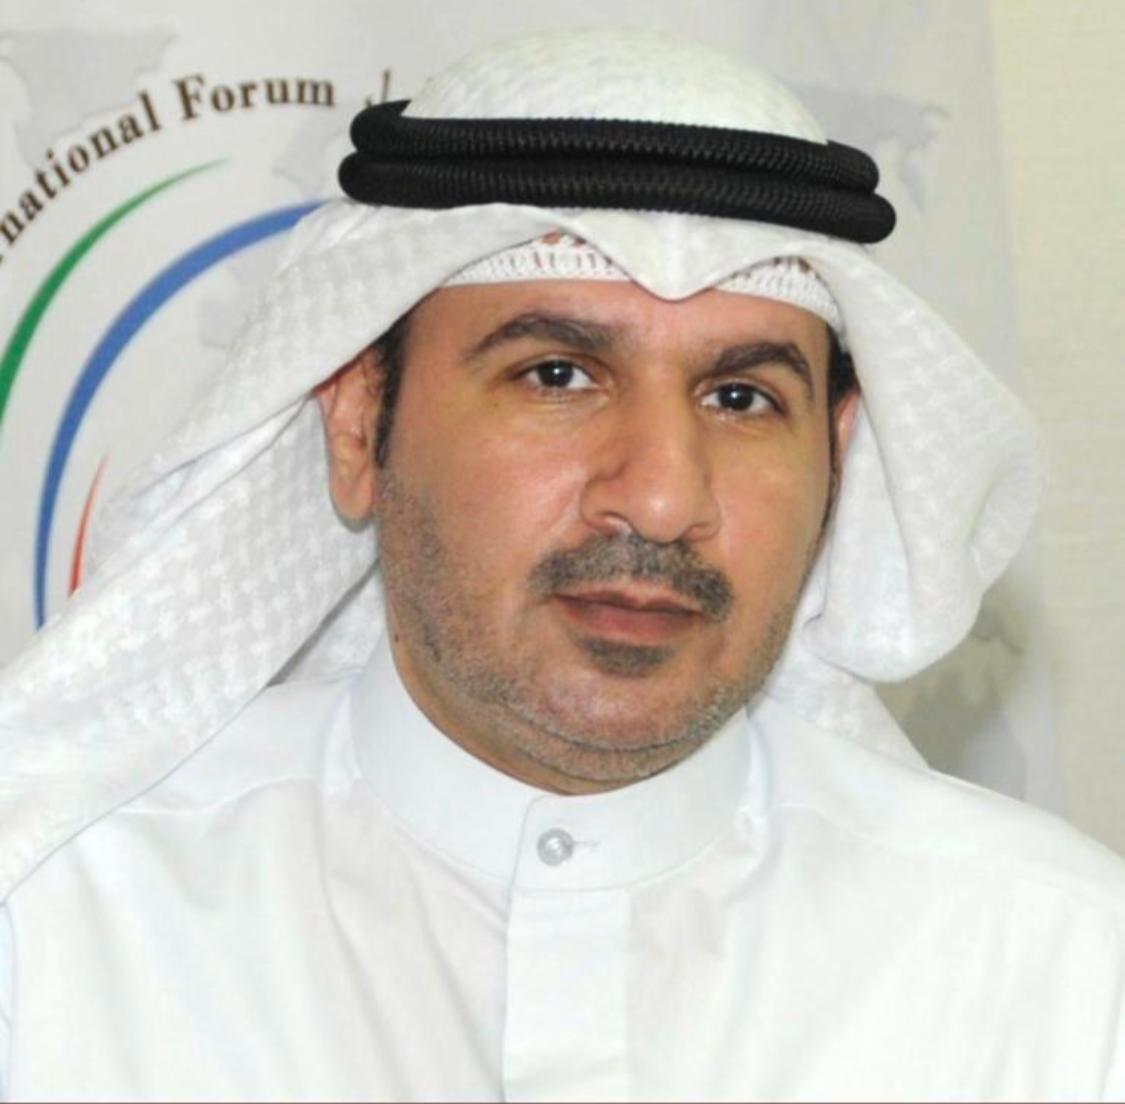 Head of the first international scientific forum for excellence Abdullah Al-Ghassab